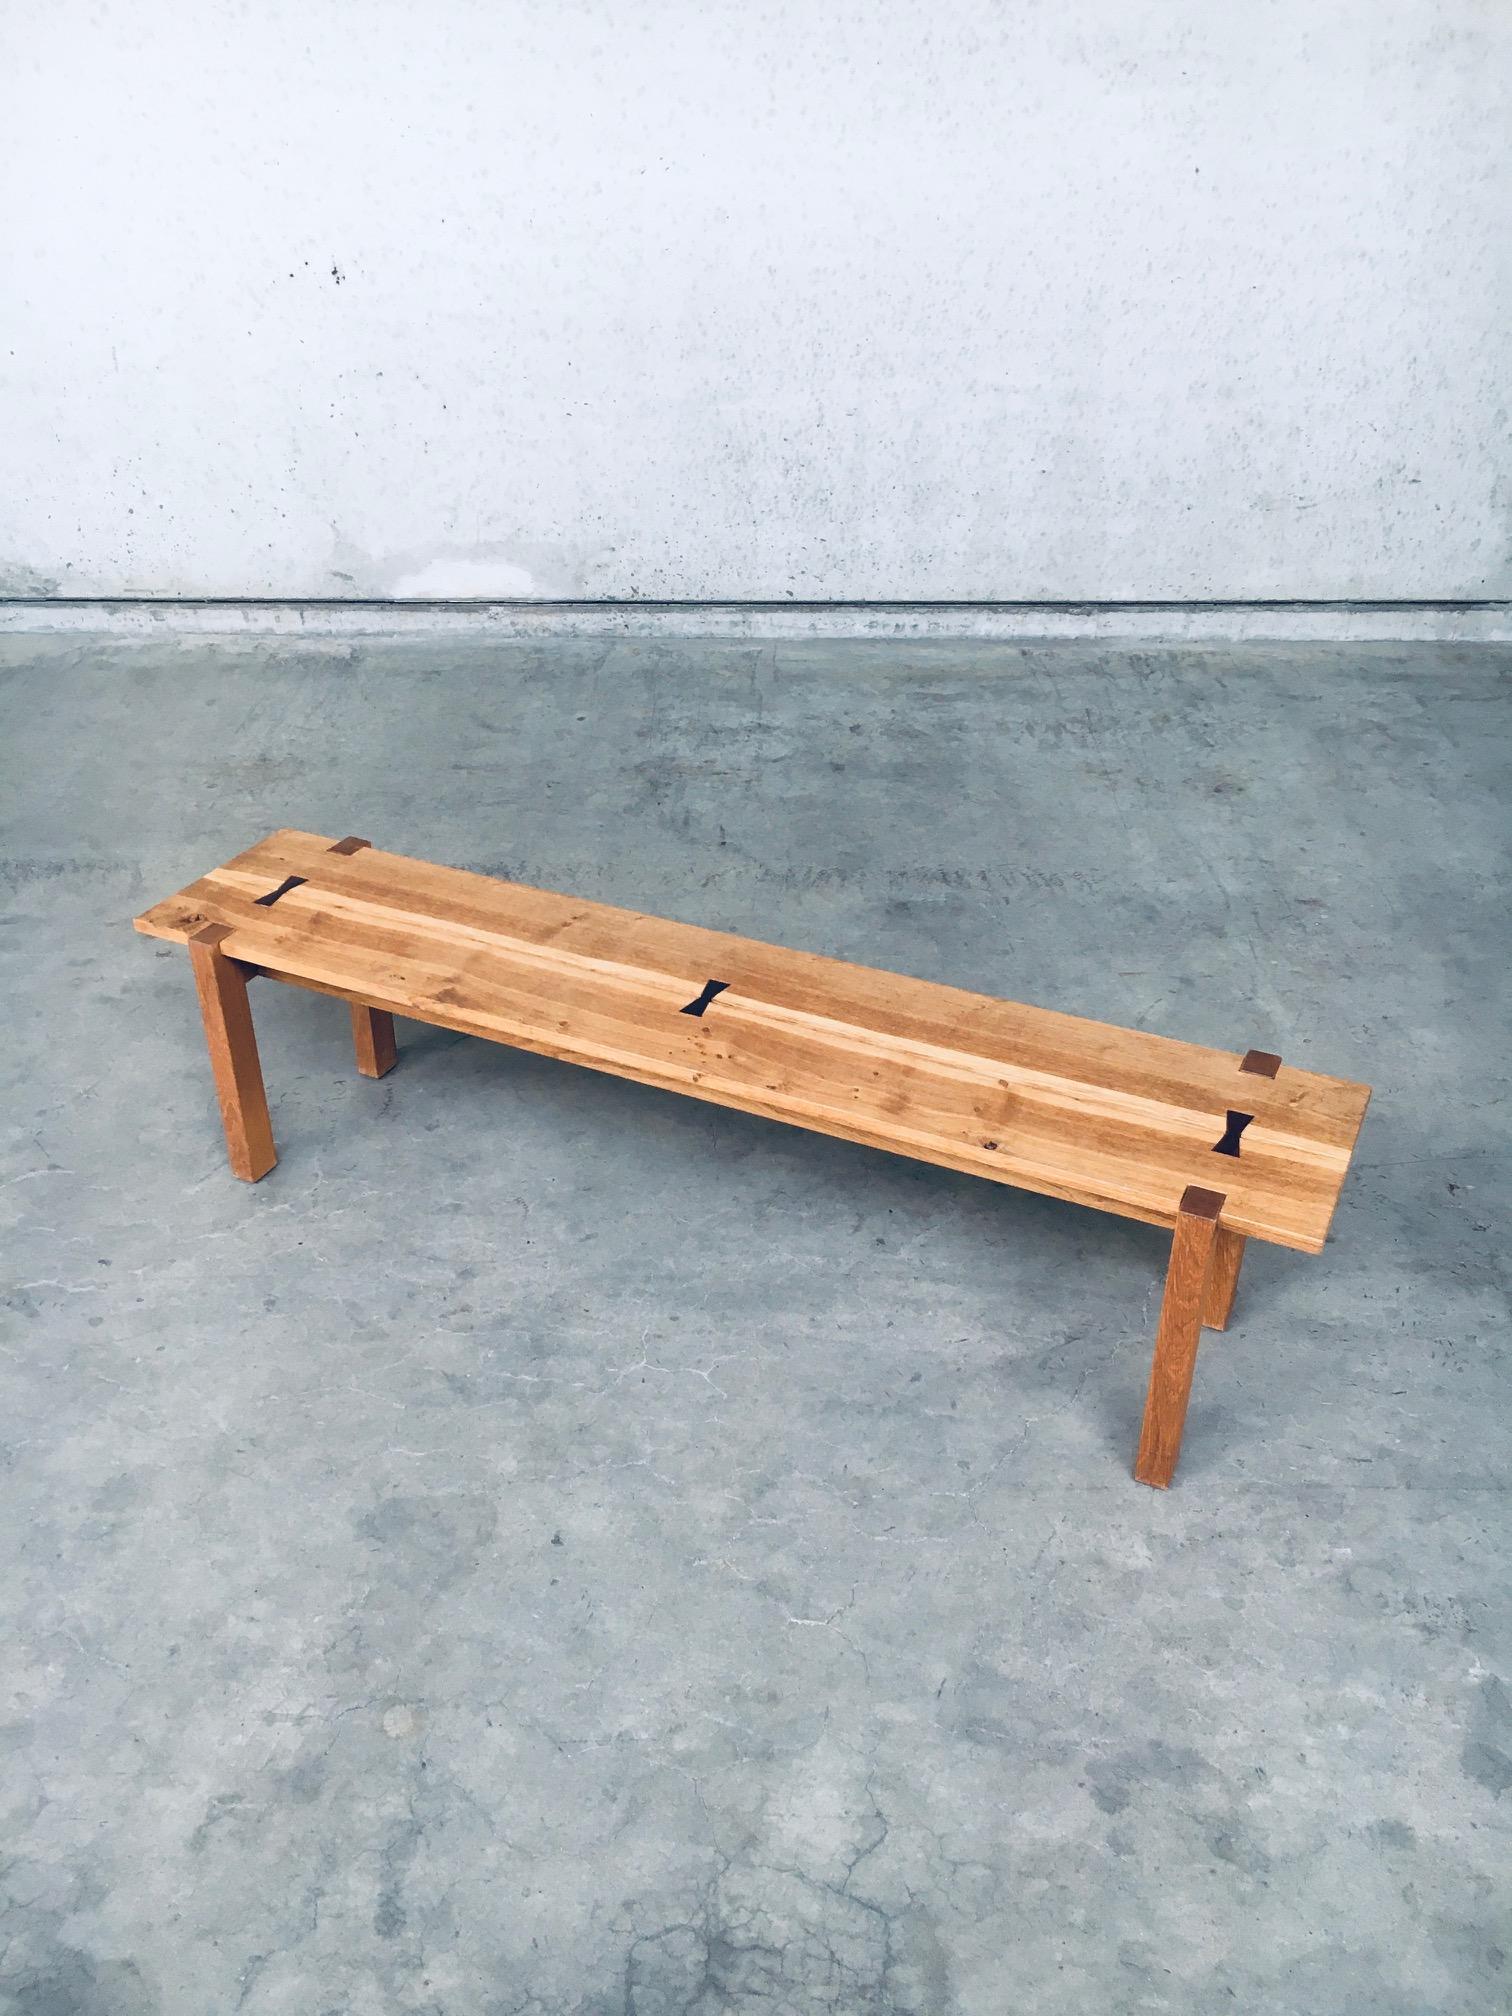 Modern design butterfly jointed planks wooden side bench. Made in Belgium, early 2000's. Wood constructed bench with 2 planks as seat which are jointed with dark wooden butterfly wedges on 4 legs which are set in the top planks. Nice designed bench.